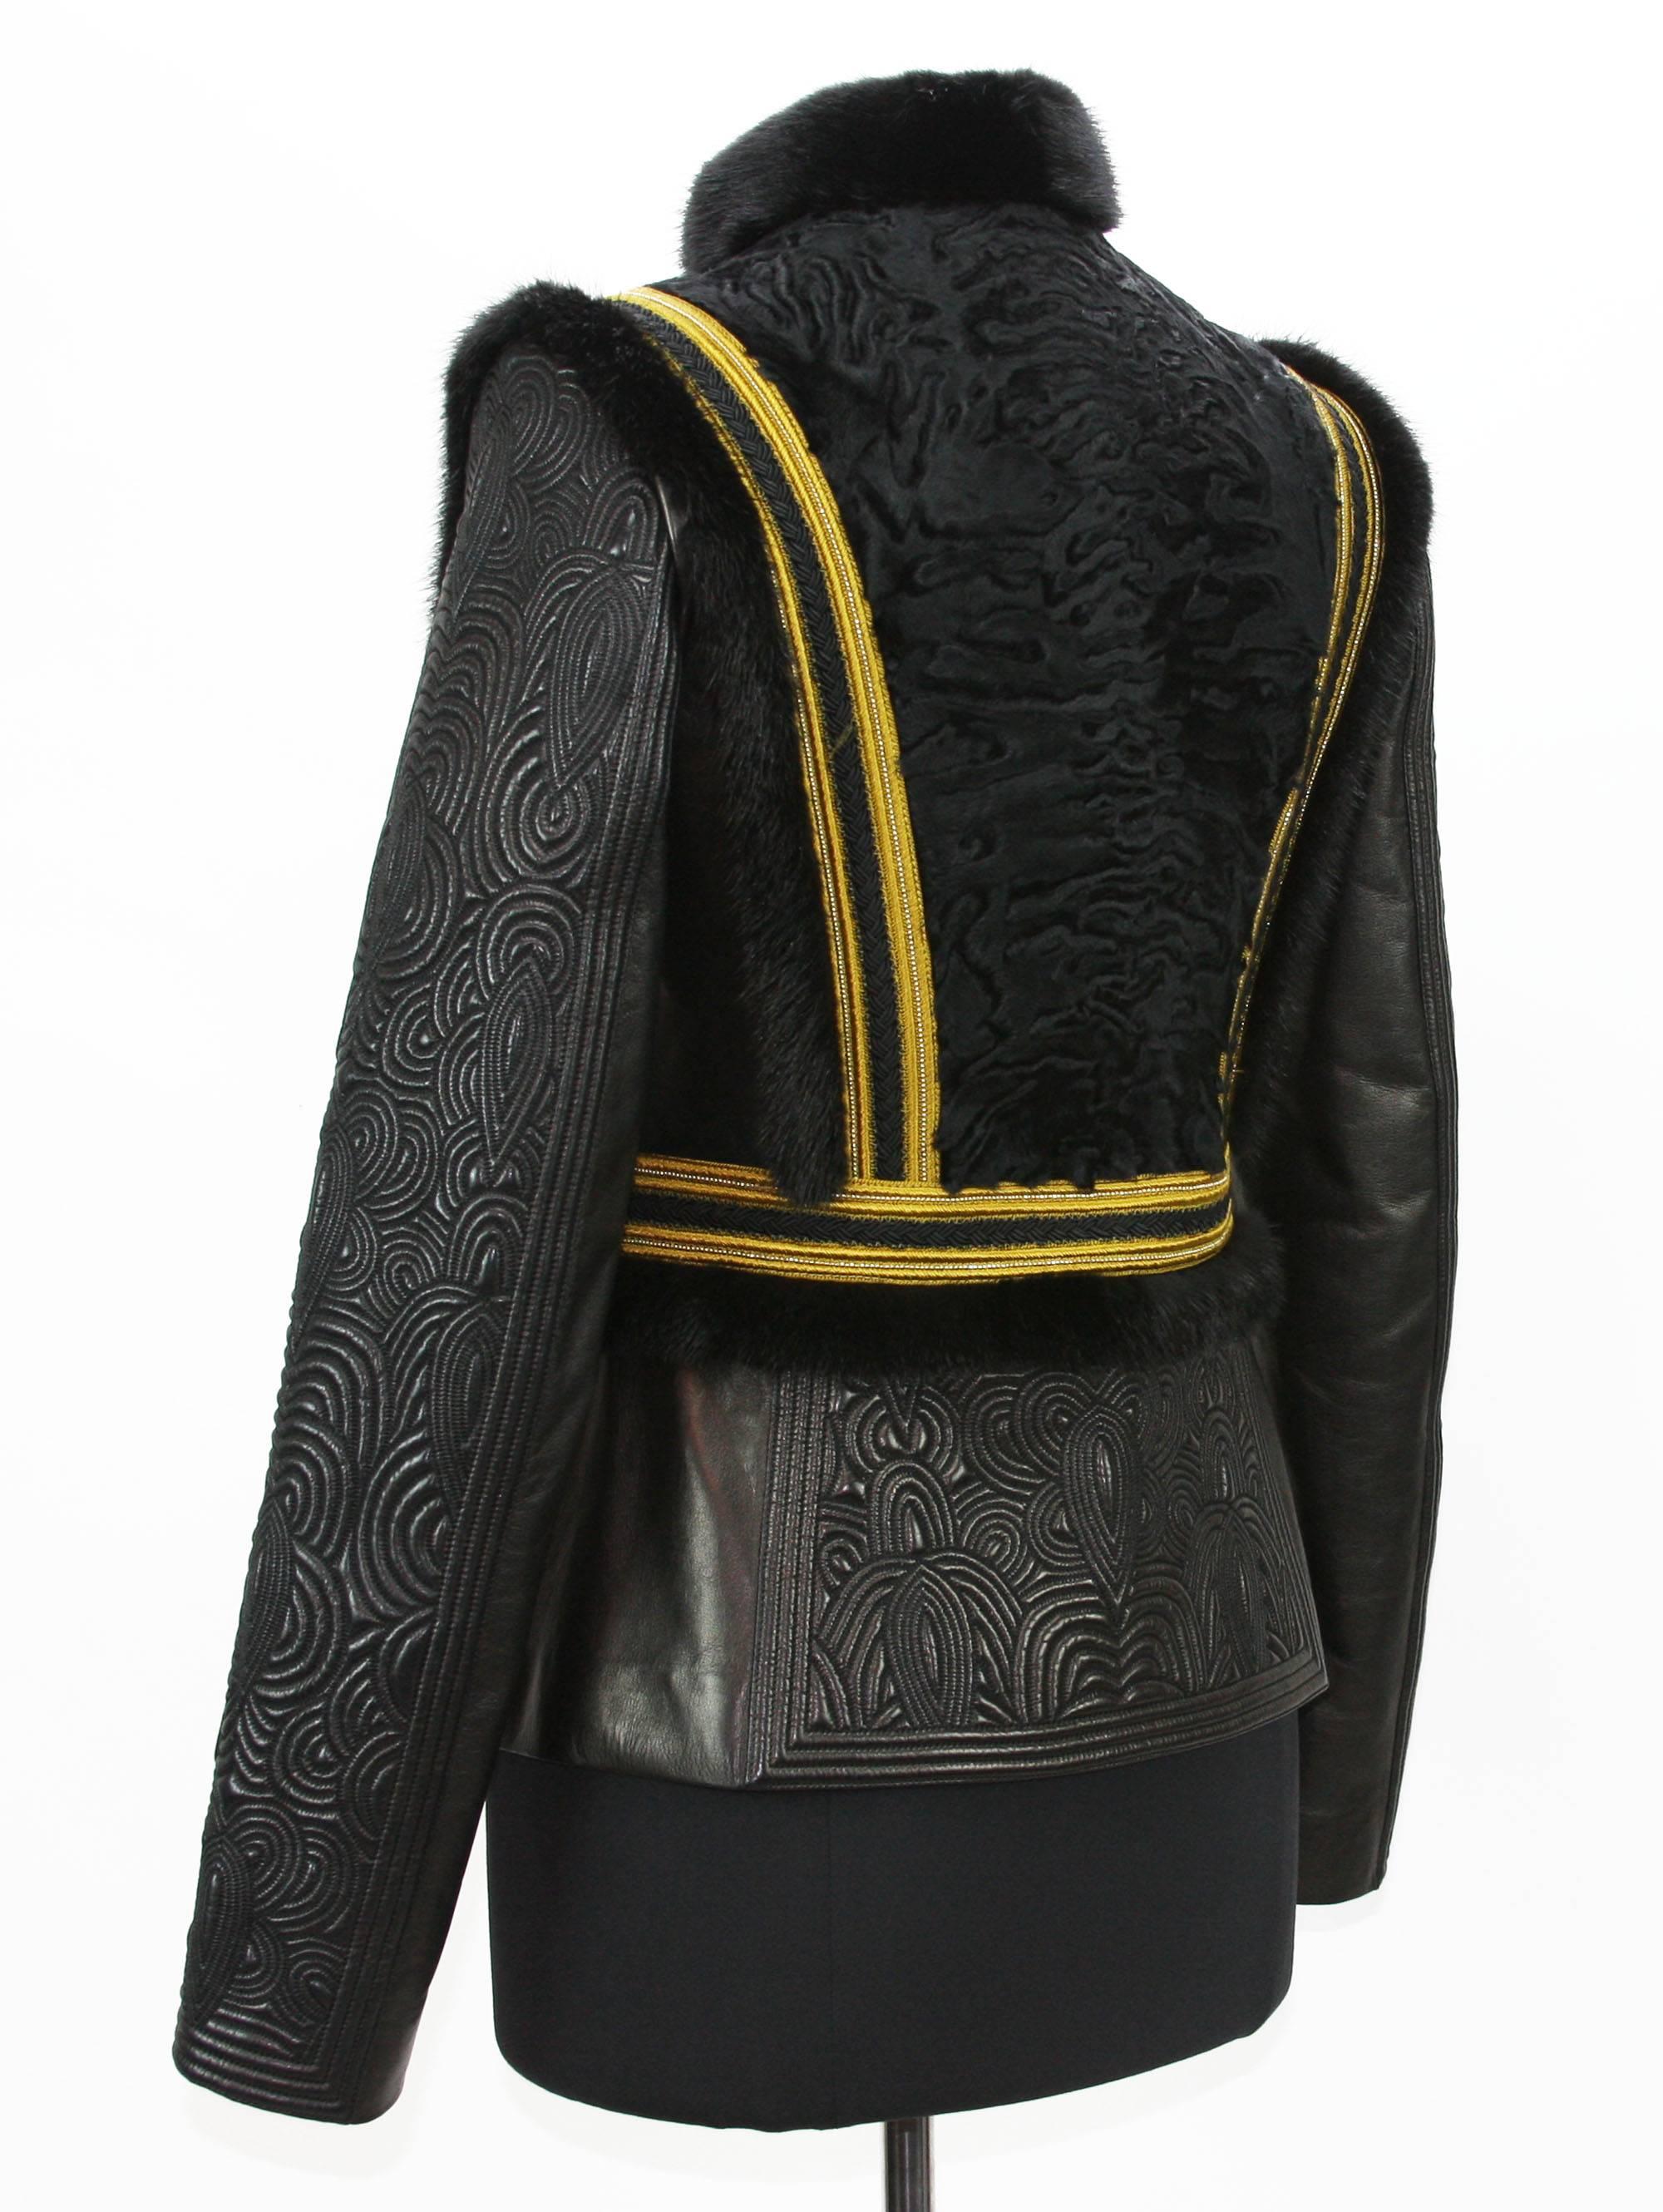 Black NEW Exquisite $7650 ETRO Embossed Leather Mink Fur Lamb Jacket It.42 - US 6 For Sale